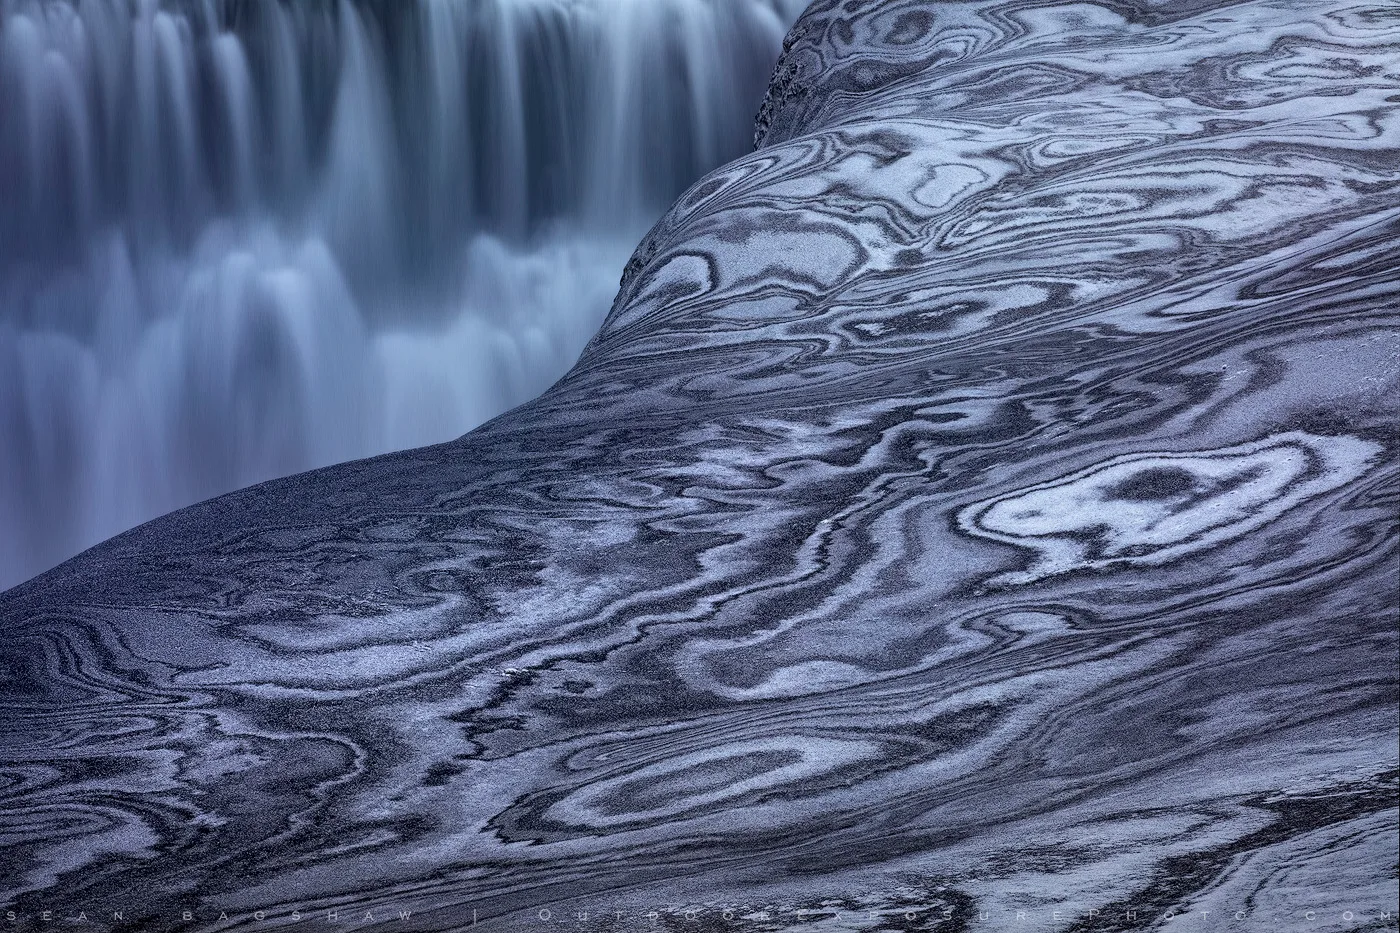 Psychedelic Dettifoss, Iceland